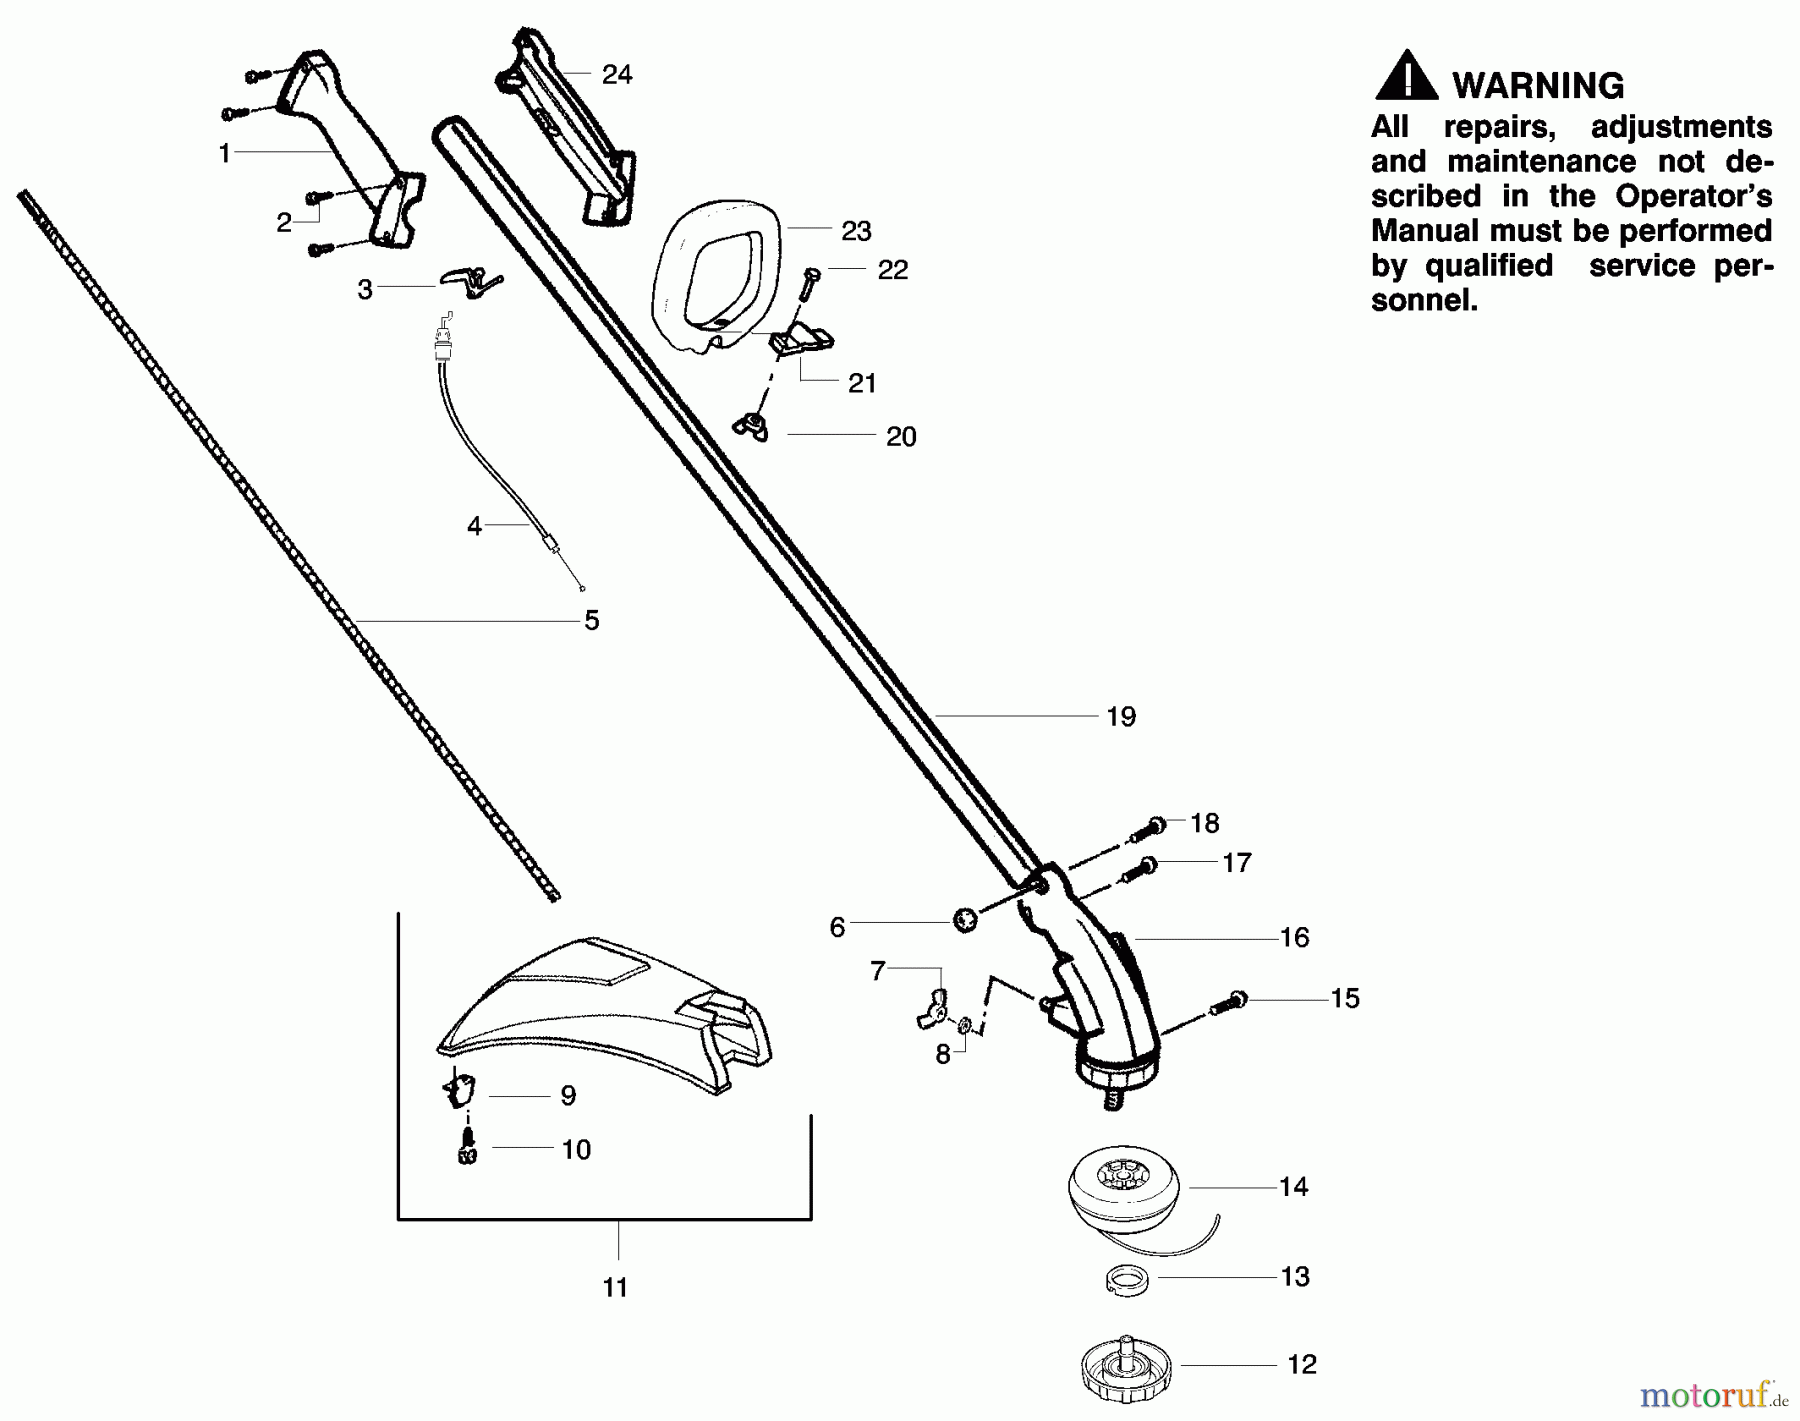  Poulan / Weed Eater Motorsensen, Trimmer PL25 (Type 2) - Poulan String Trimmer Handle, Chassis & Bar Assembly